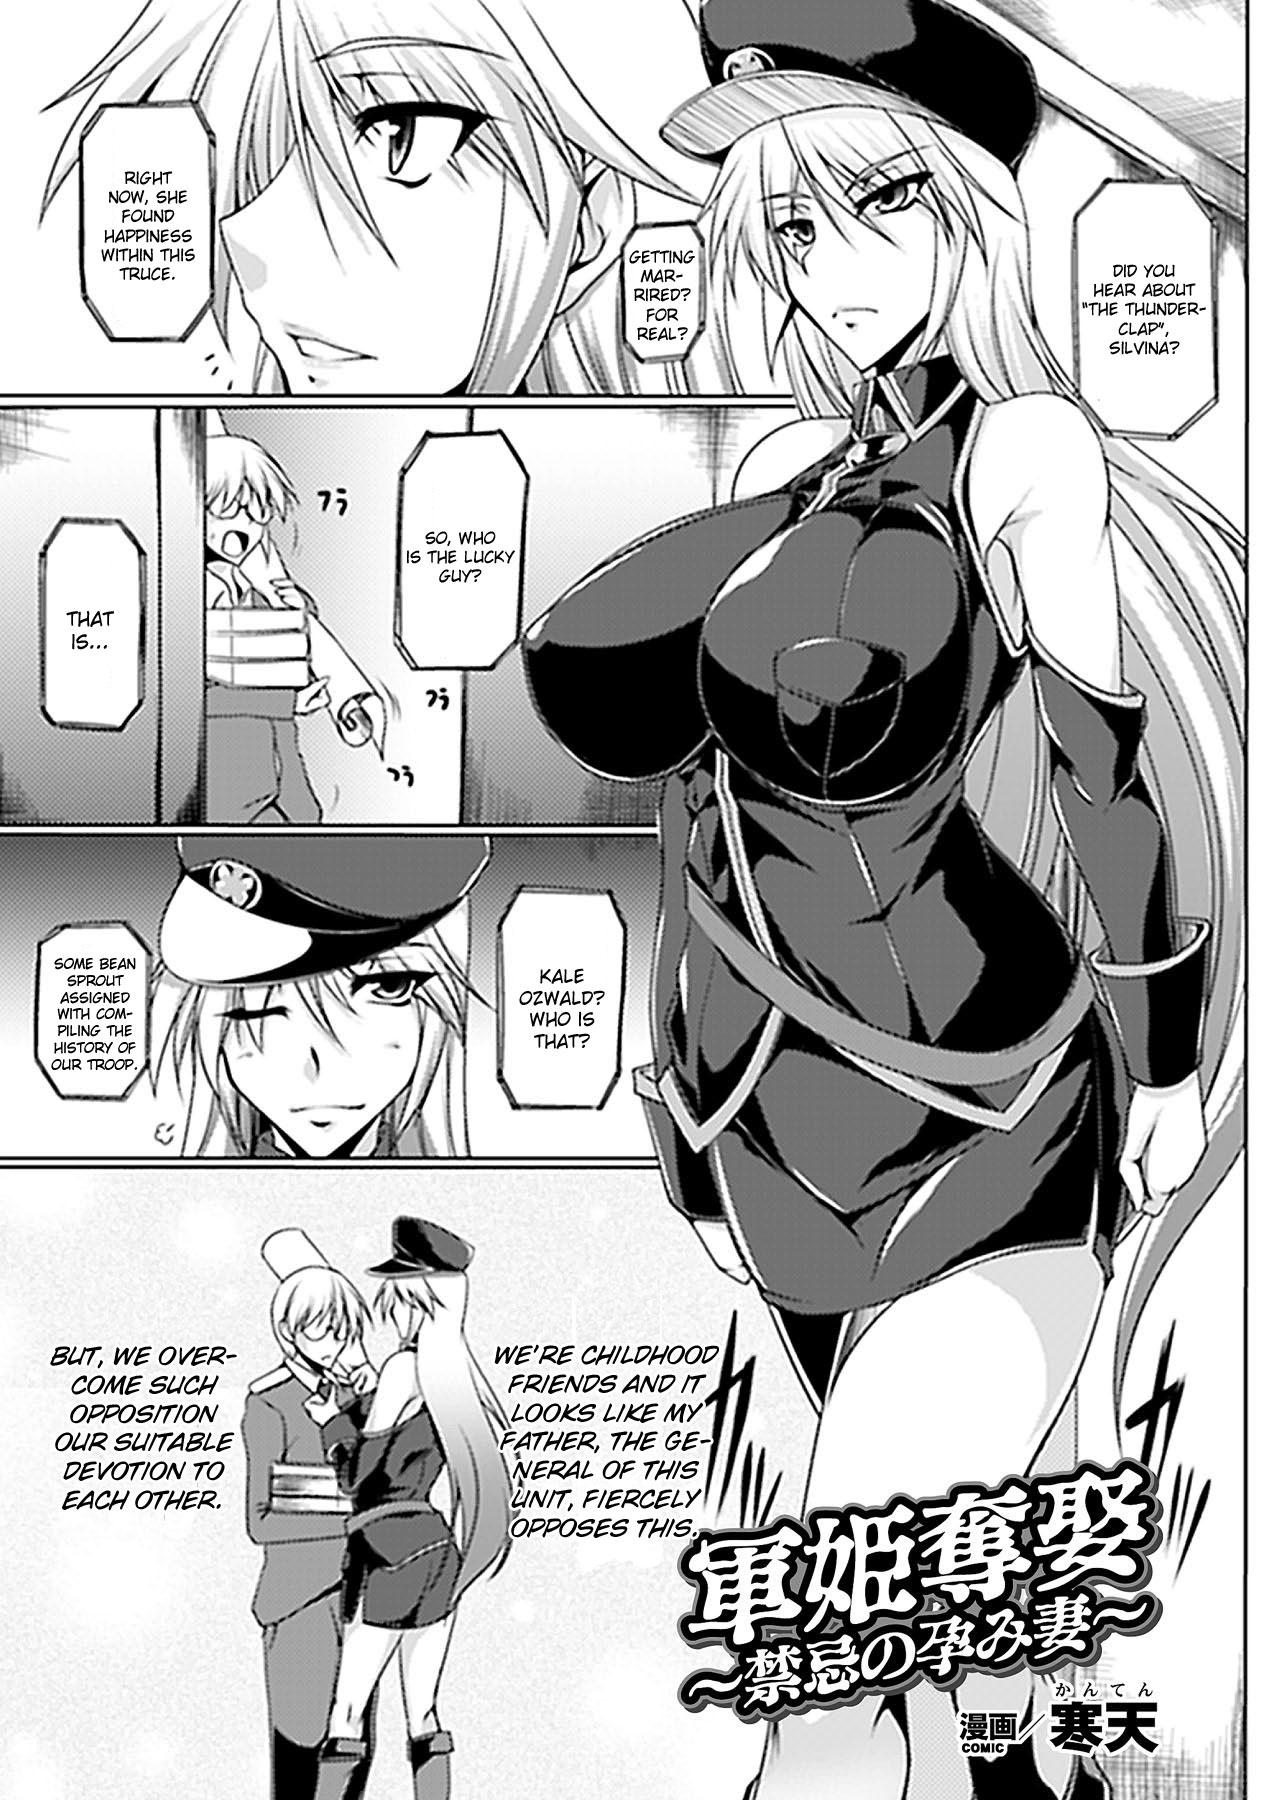 Transsexual Arranged Stolen Marriage of the Military Princess Bigtits - Page 1